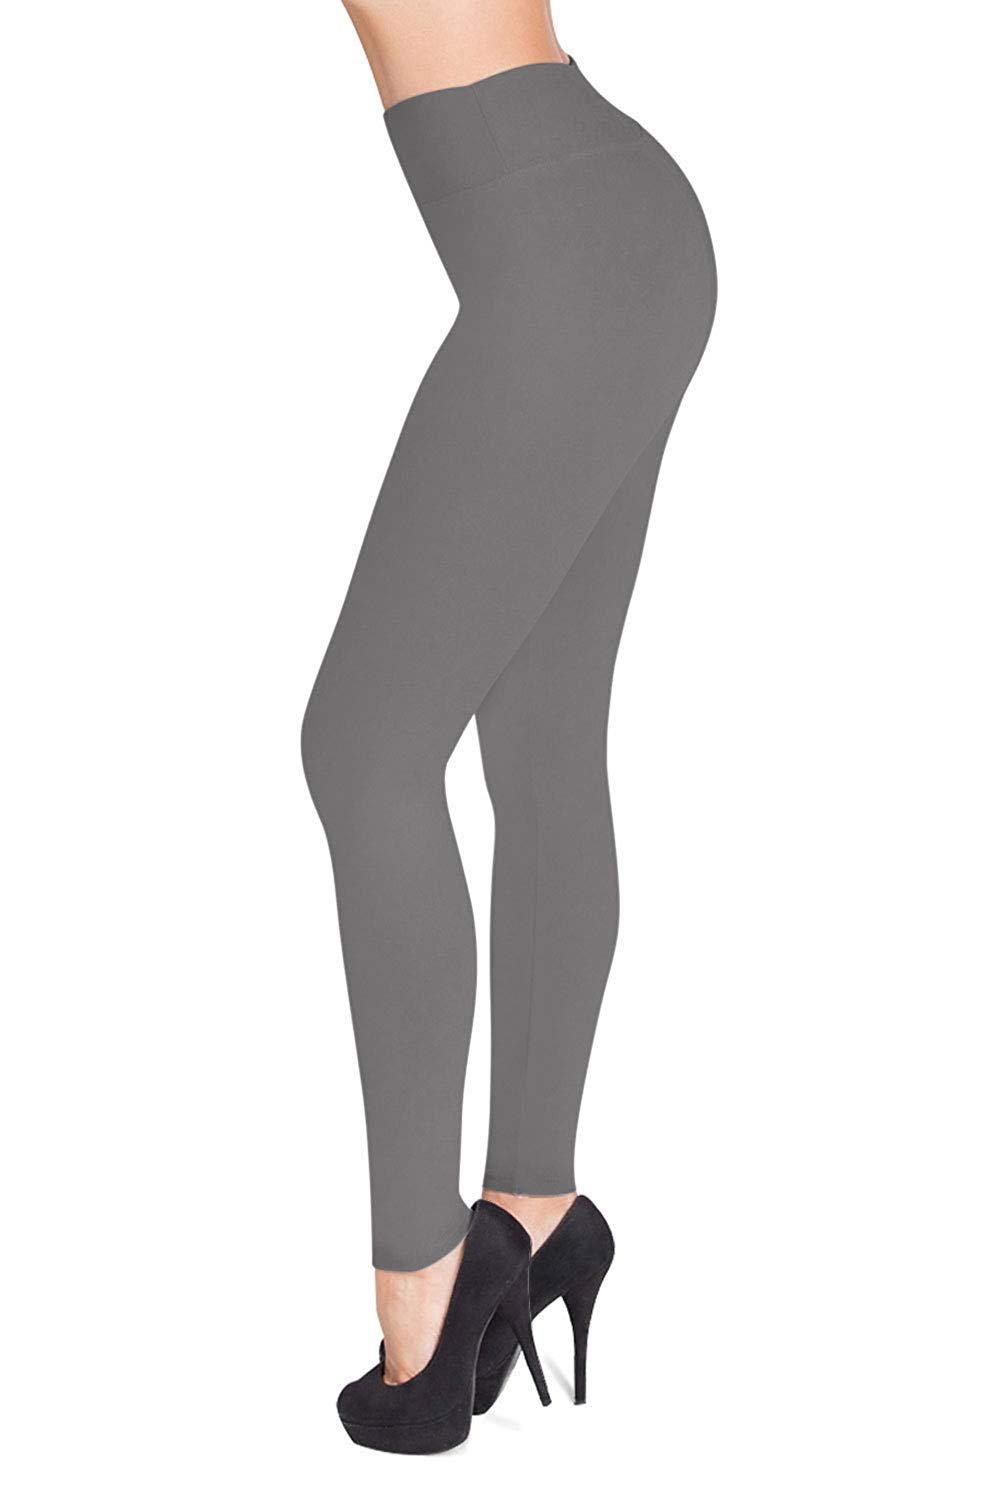 SATINA High Waisted Leggings for Women - Workout Leggings for Regular & Plus Size Women - Gray Leggings Women - Yoga Leggings for Women |3 Inch Waistband (Plus Size, Gray), Slim